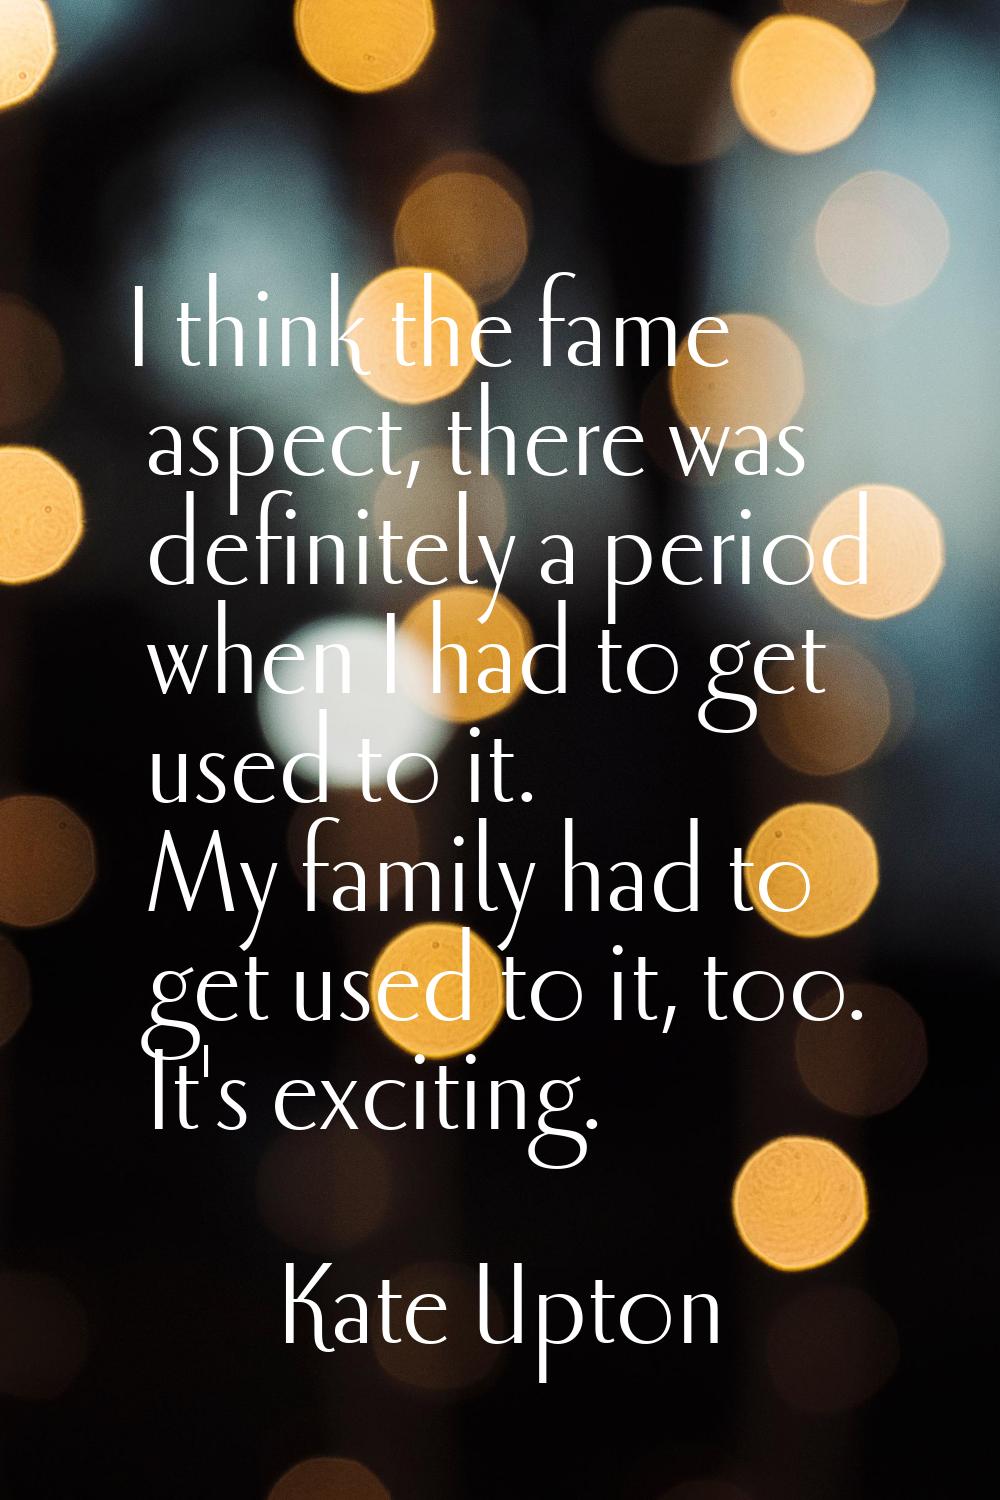 I think the fame aspect, there was definitely a period when I had to get used to it. My family had 